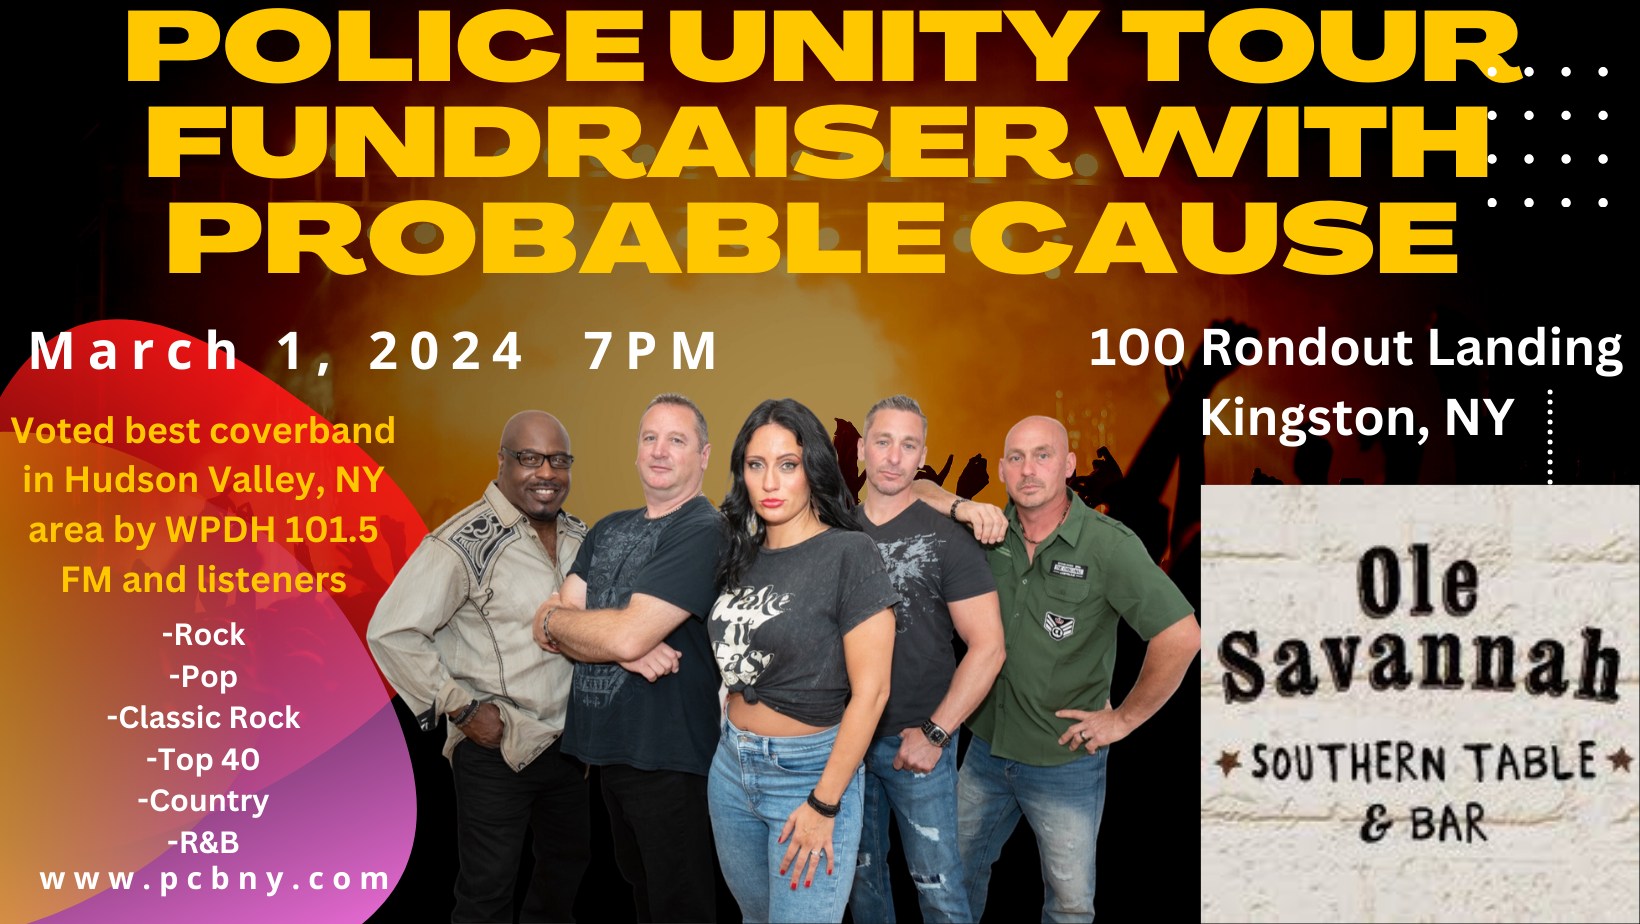 Police Unity Tour Fundraiser with Probable Cause